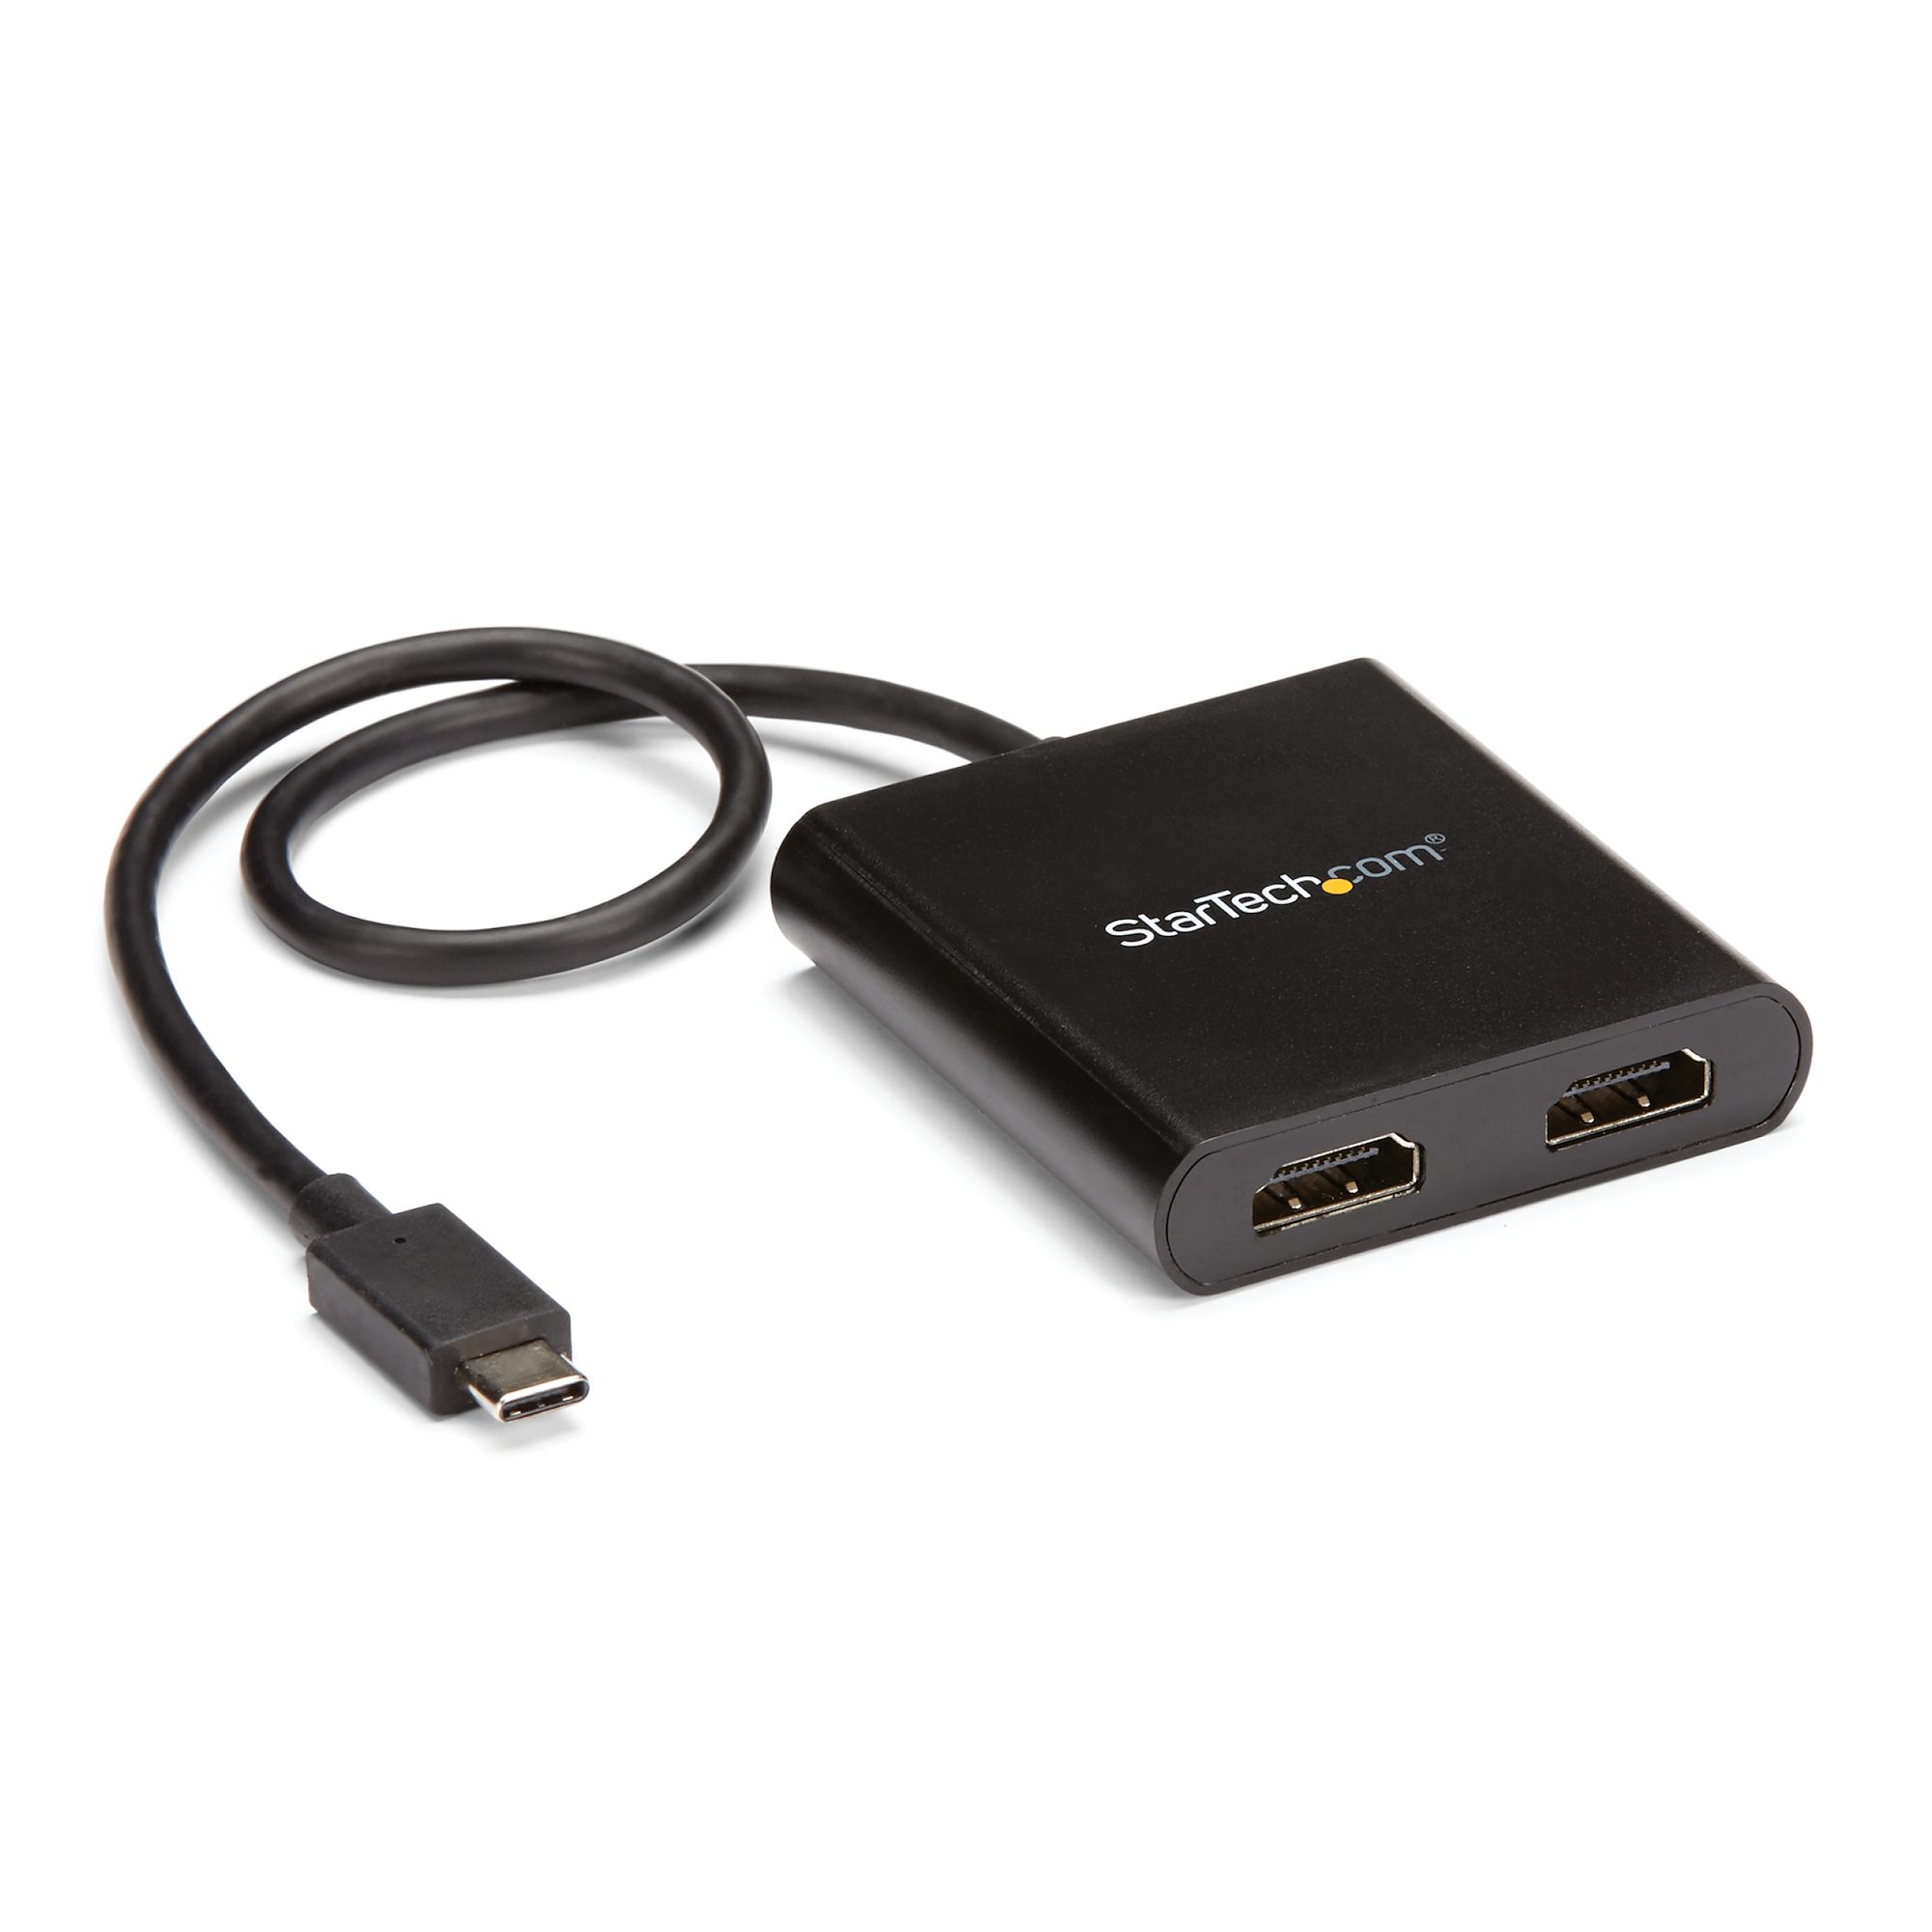 HP USB-C™ to HDMI 2.0 Adapter